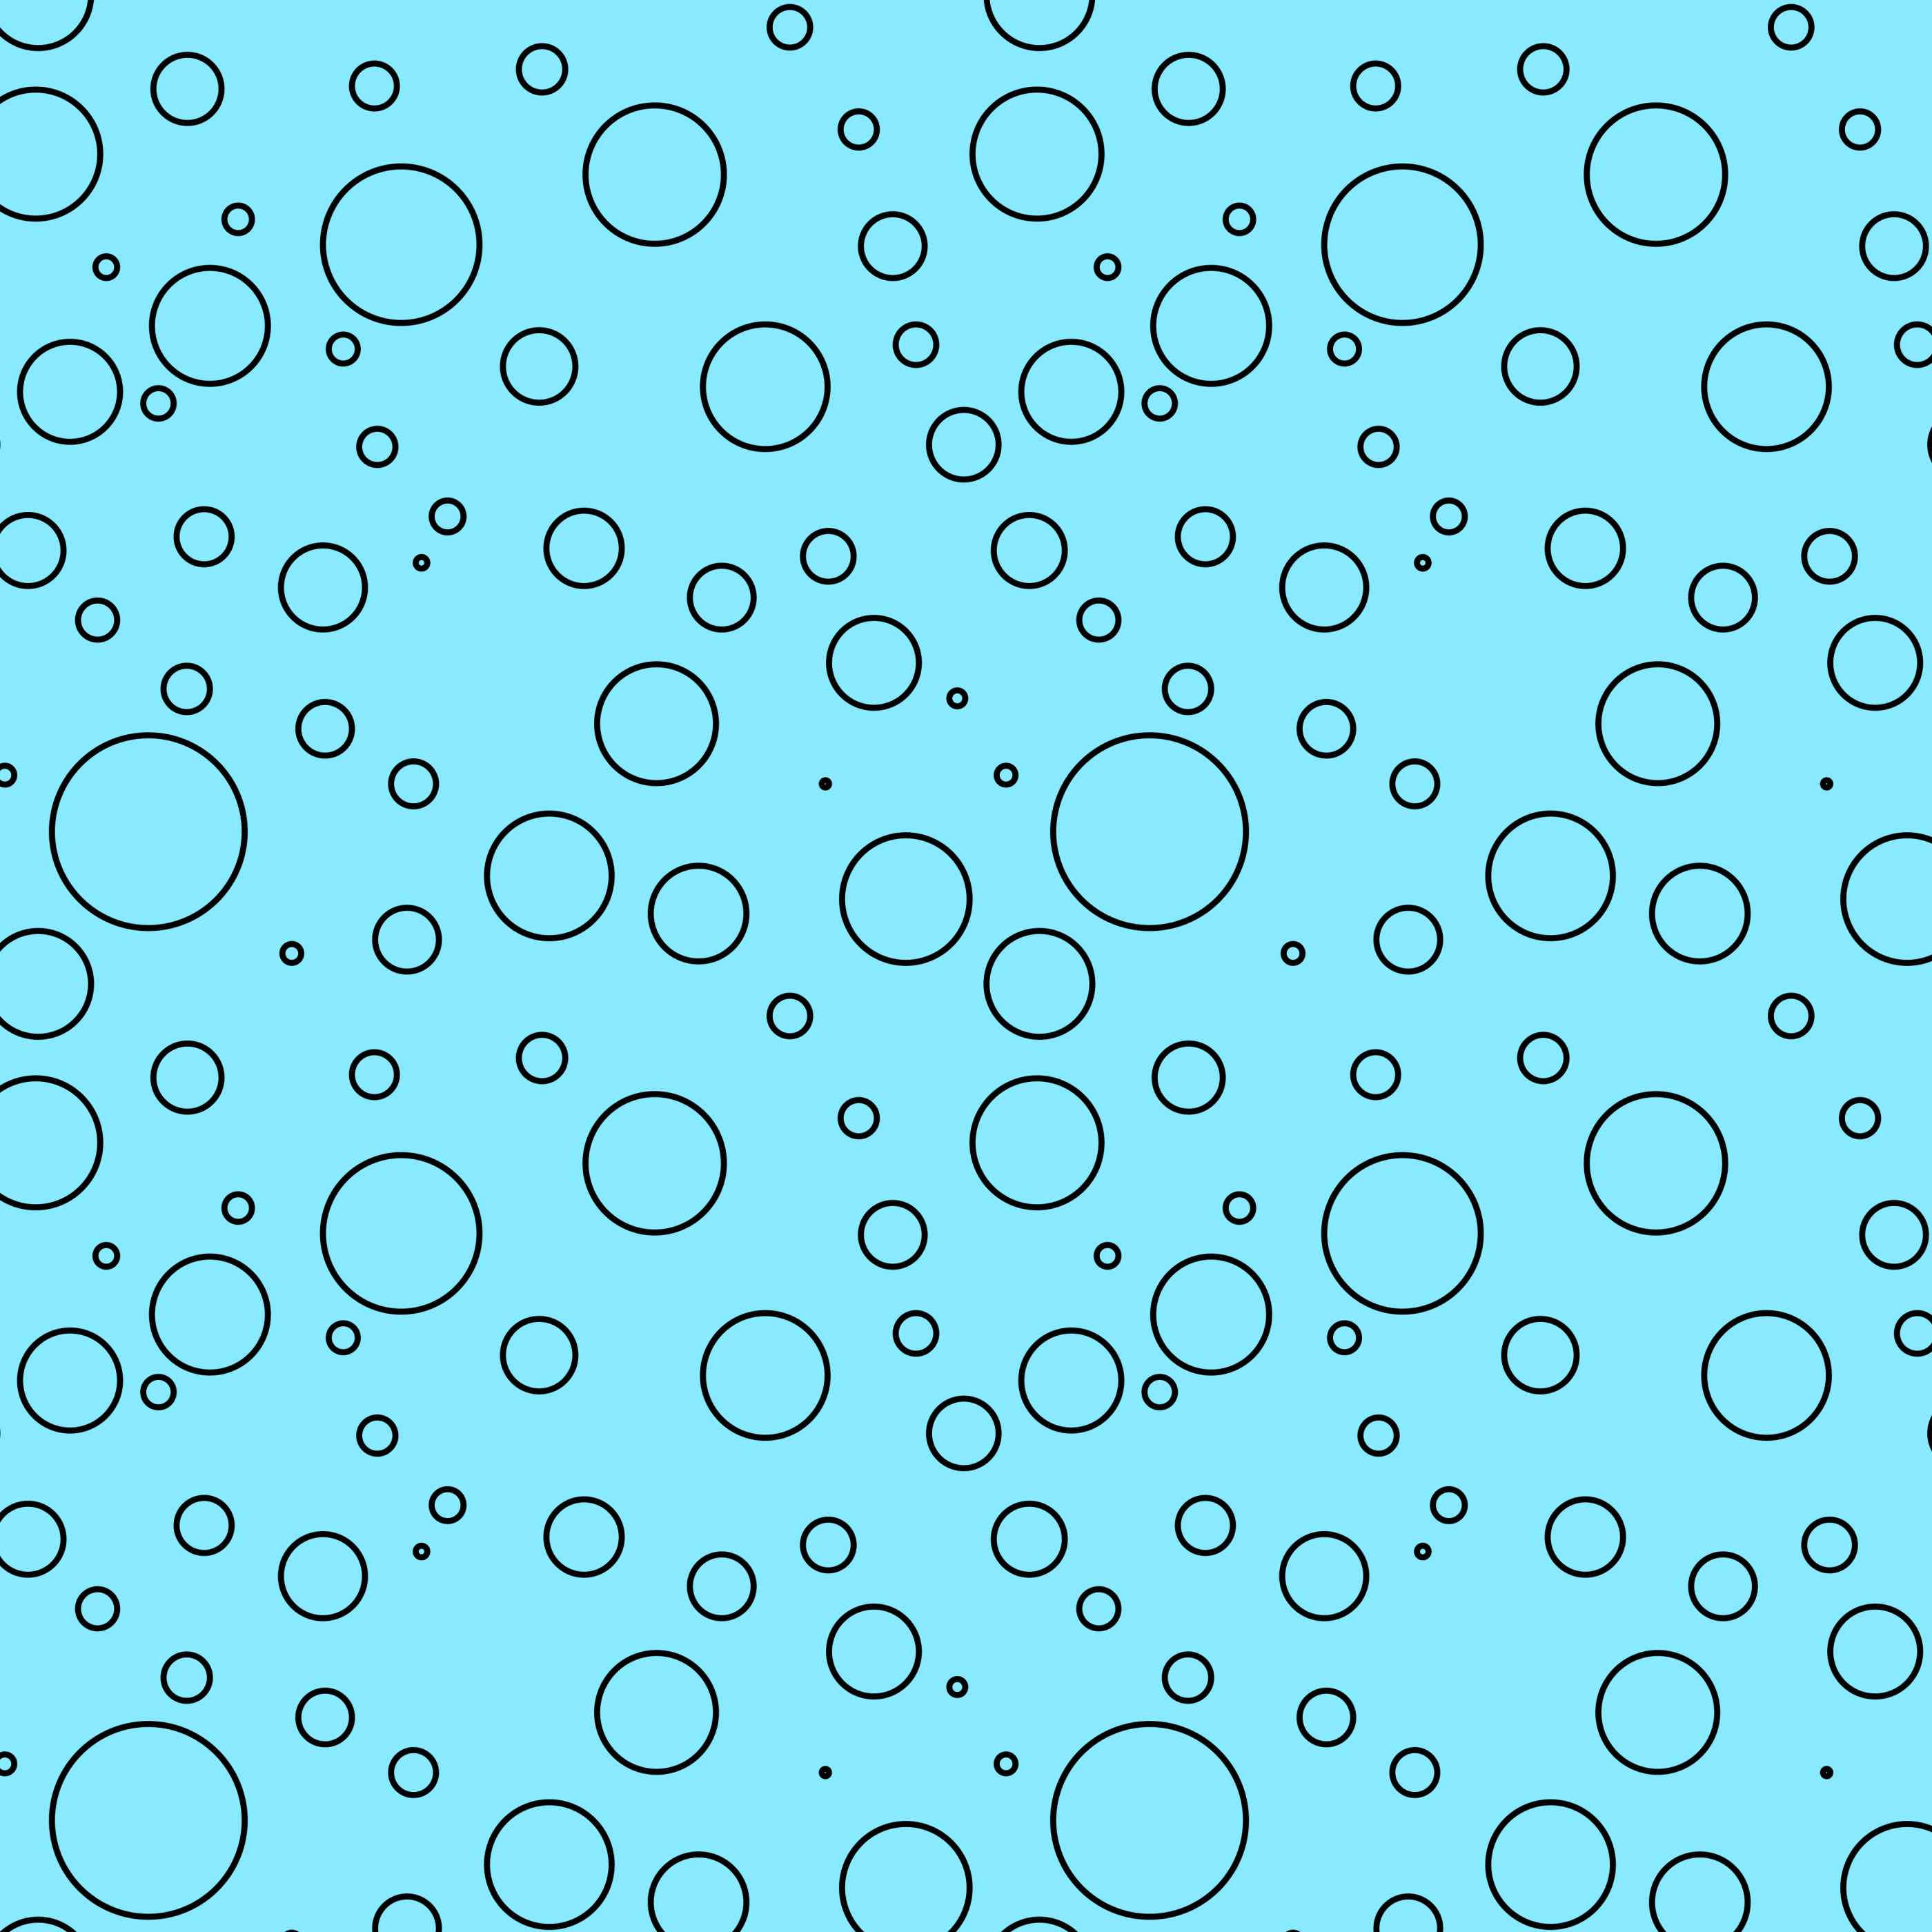 Lot of bubbles on a blue background.